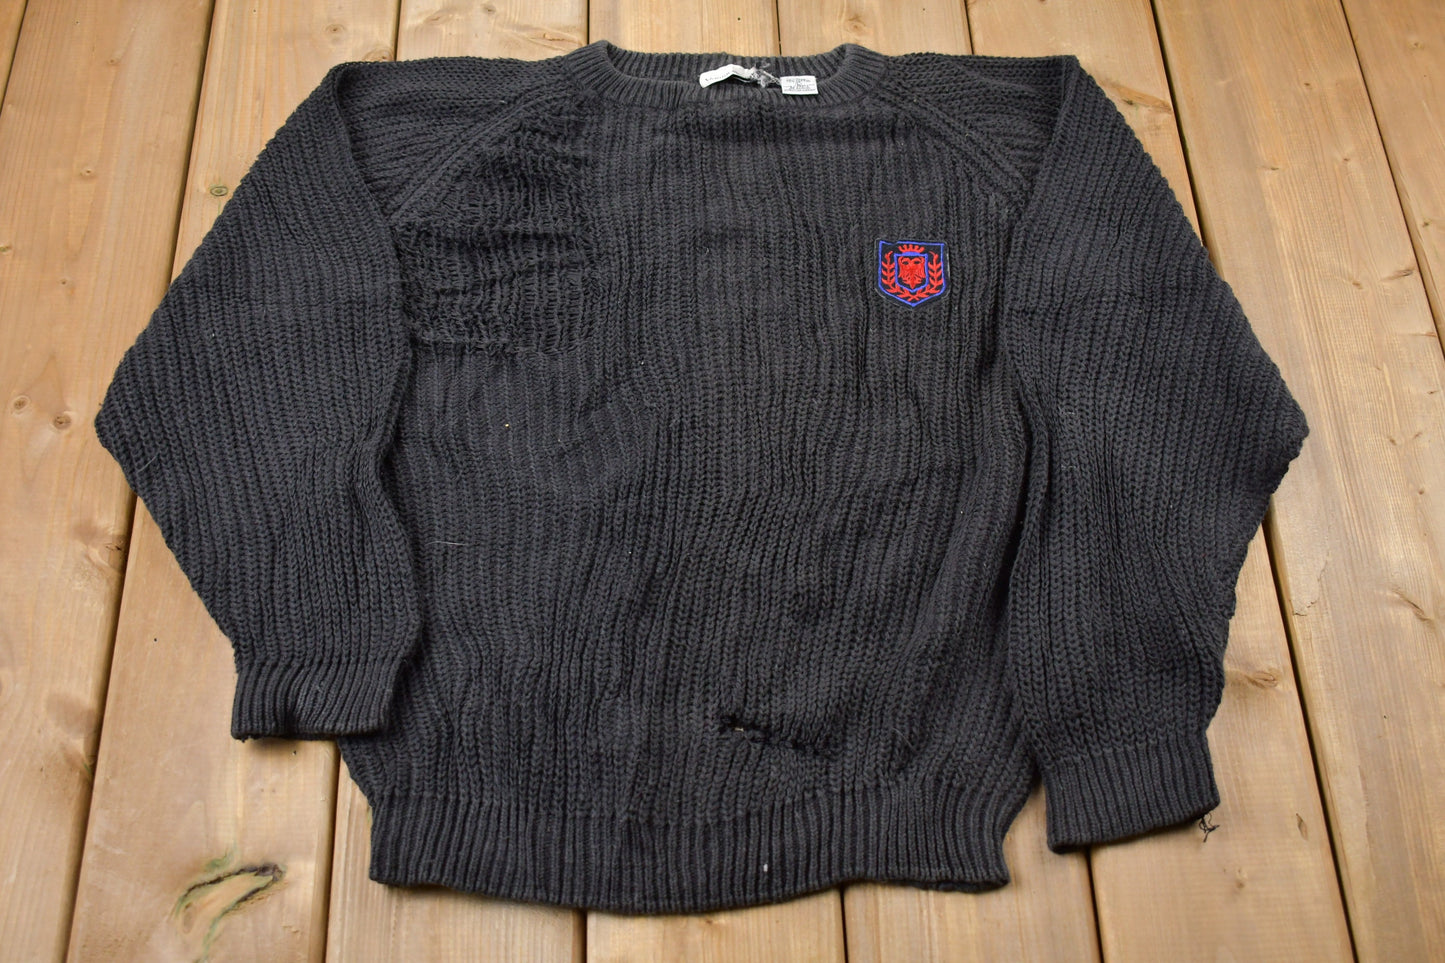 Vintage 1980s Jason Maxwell Embroidered Knitted Sweater / Vintage 90s Crewneck / Pattern Sweater / Outdoor / Hand Knit / Pullover Sweatshirt